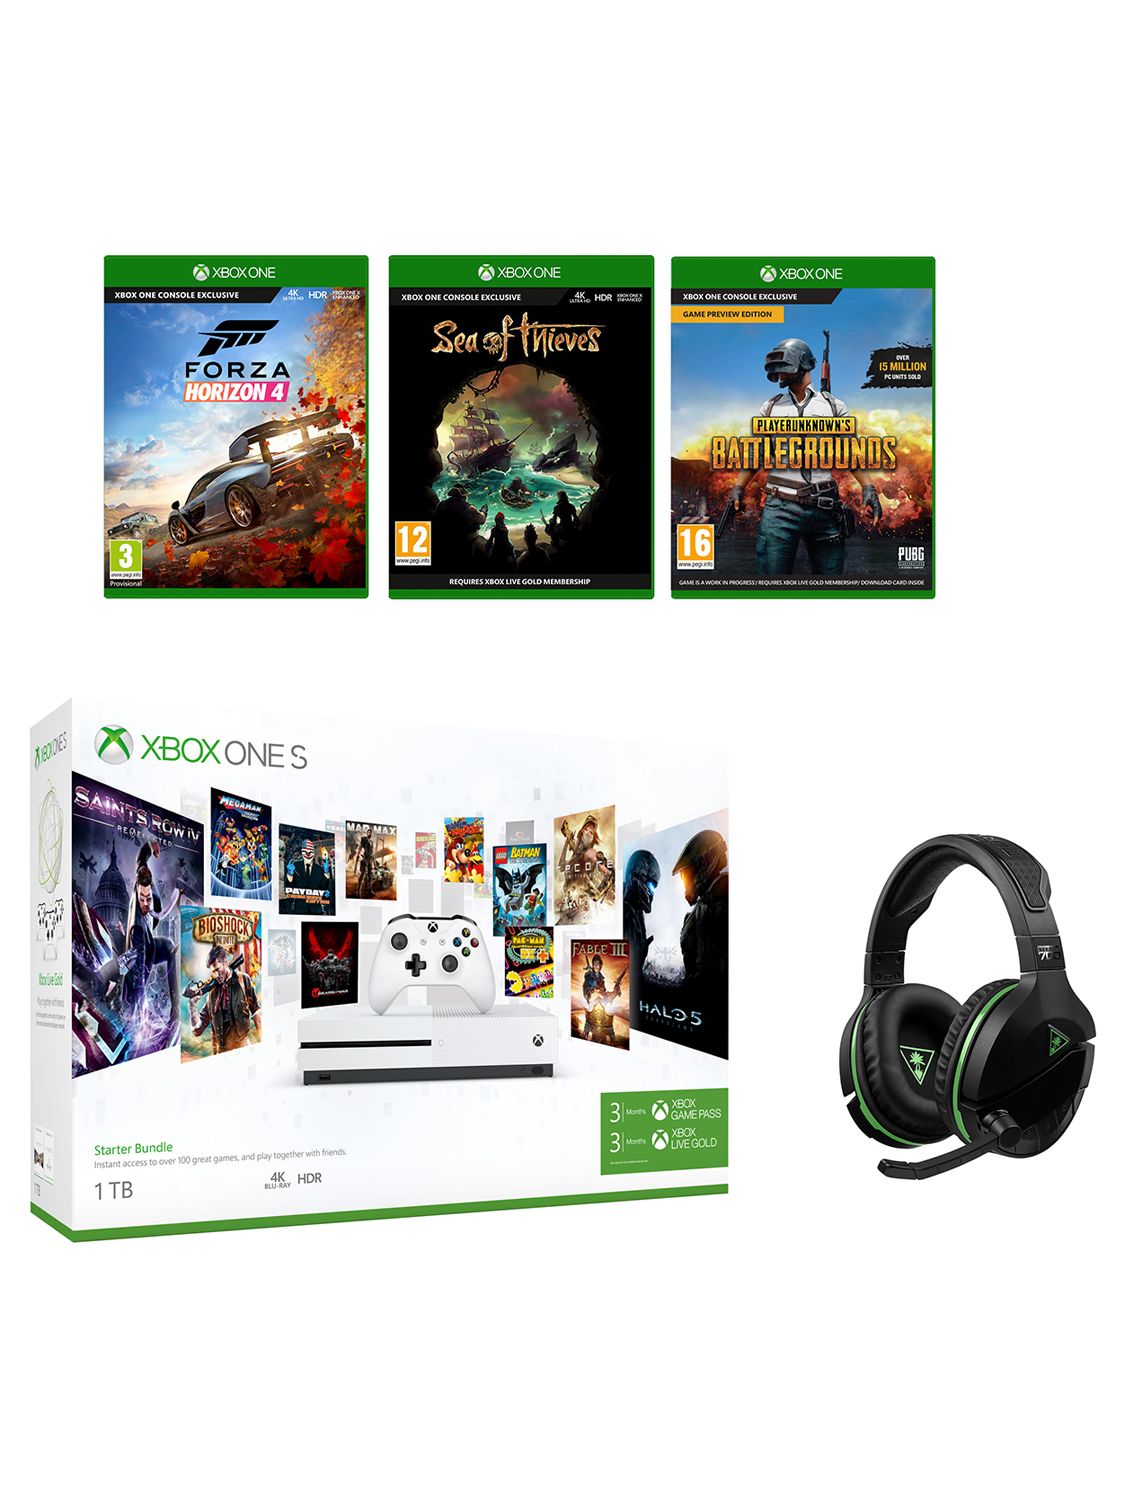 Microsoft Xbox One S Console, 1TB, with Wireless Controller and PlayerUnknown’s Battlegrounds, Forza Horizon 4, Sea of Thieves and RIG 800LX Wireless Gaming Headset Bundle